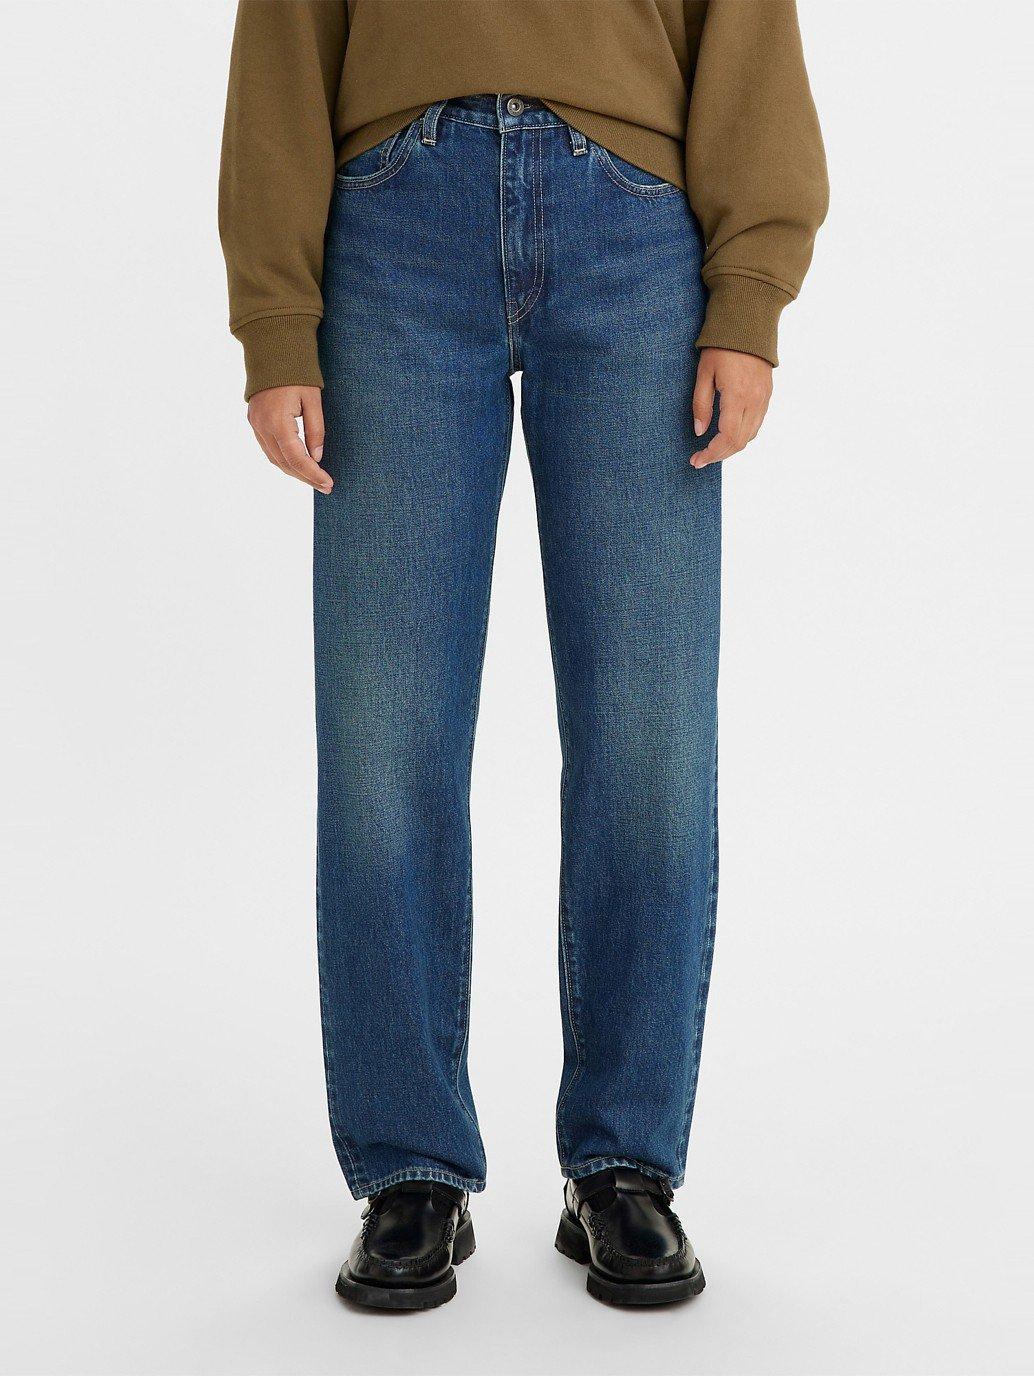 Buy Levi's® Made & Crafted® Women's Column Jeans | Levi’s® Official ...